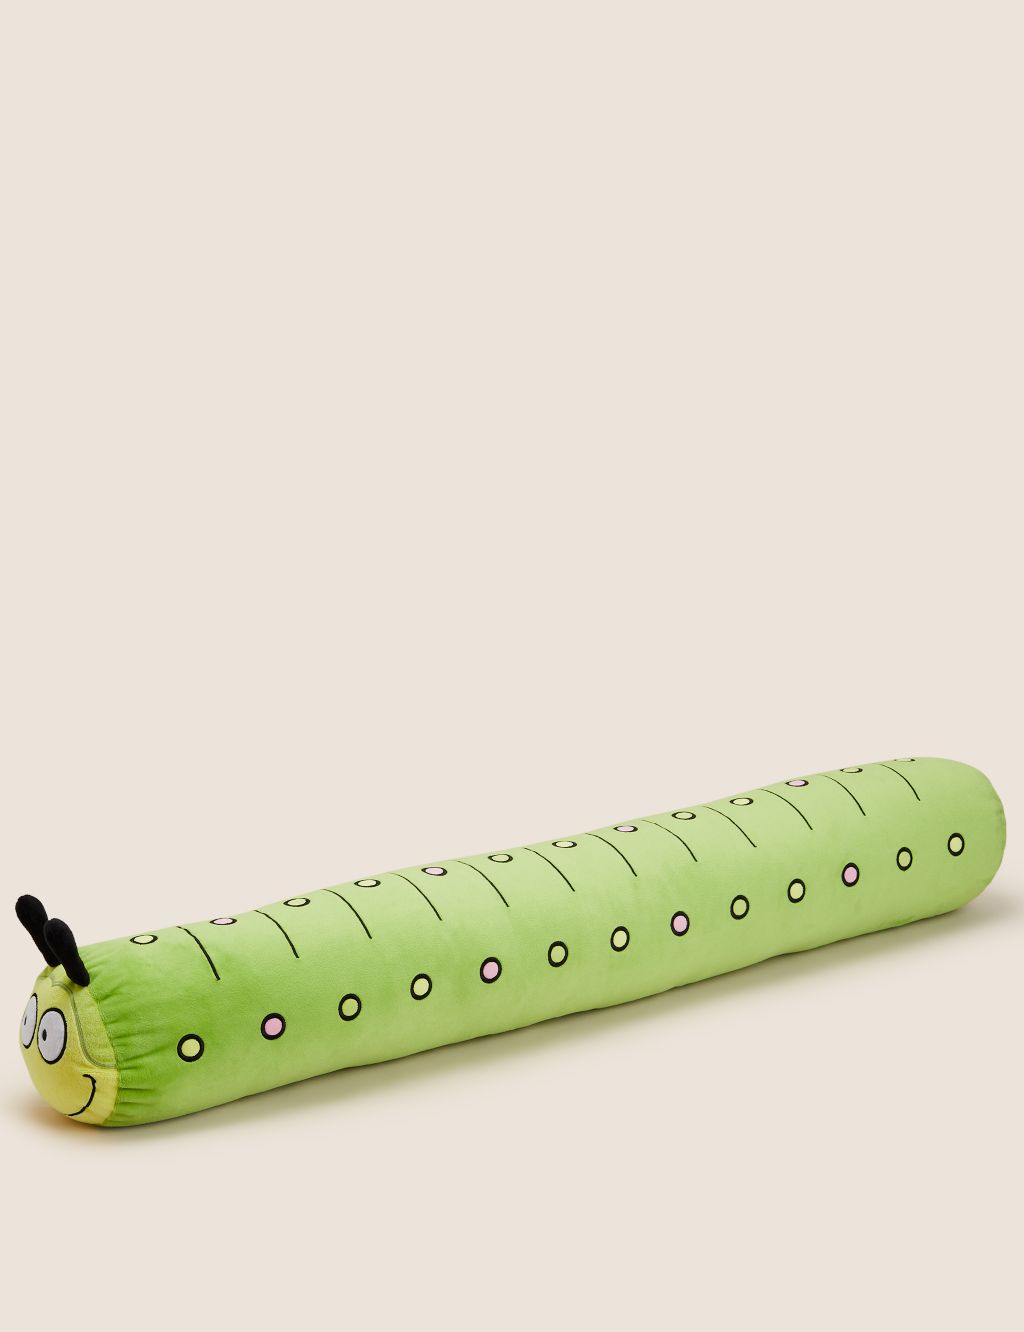 Colin The Caterpillar™ Draught Excluder image 1